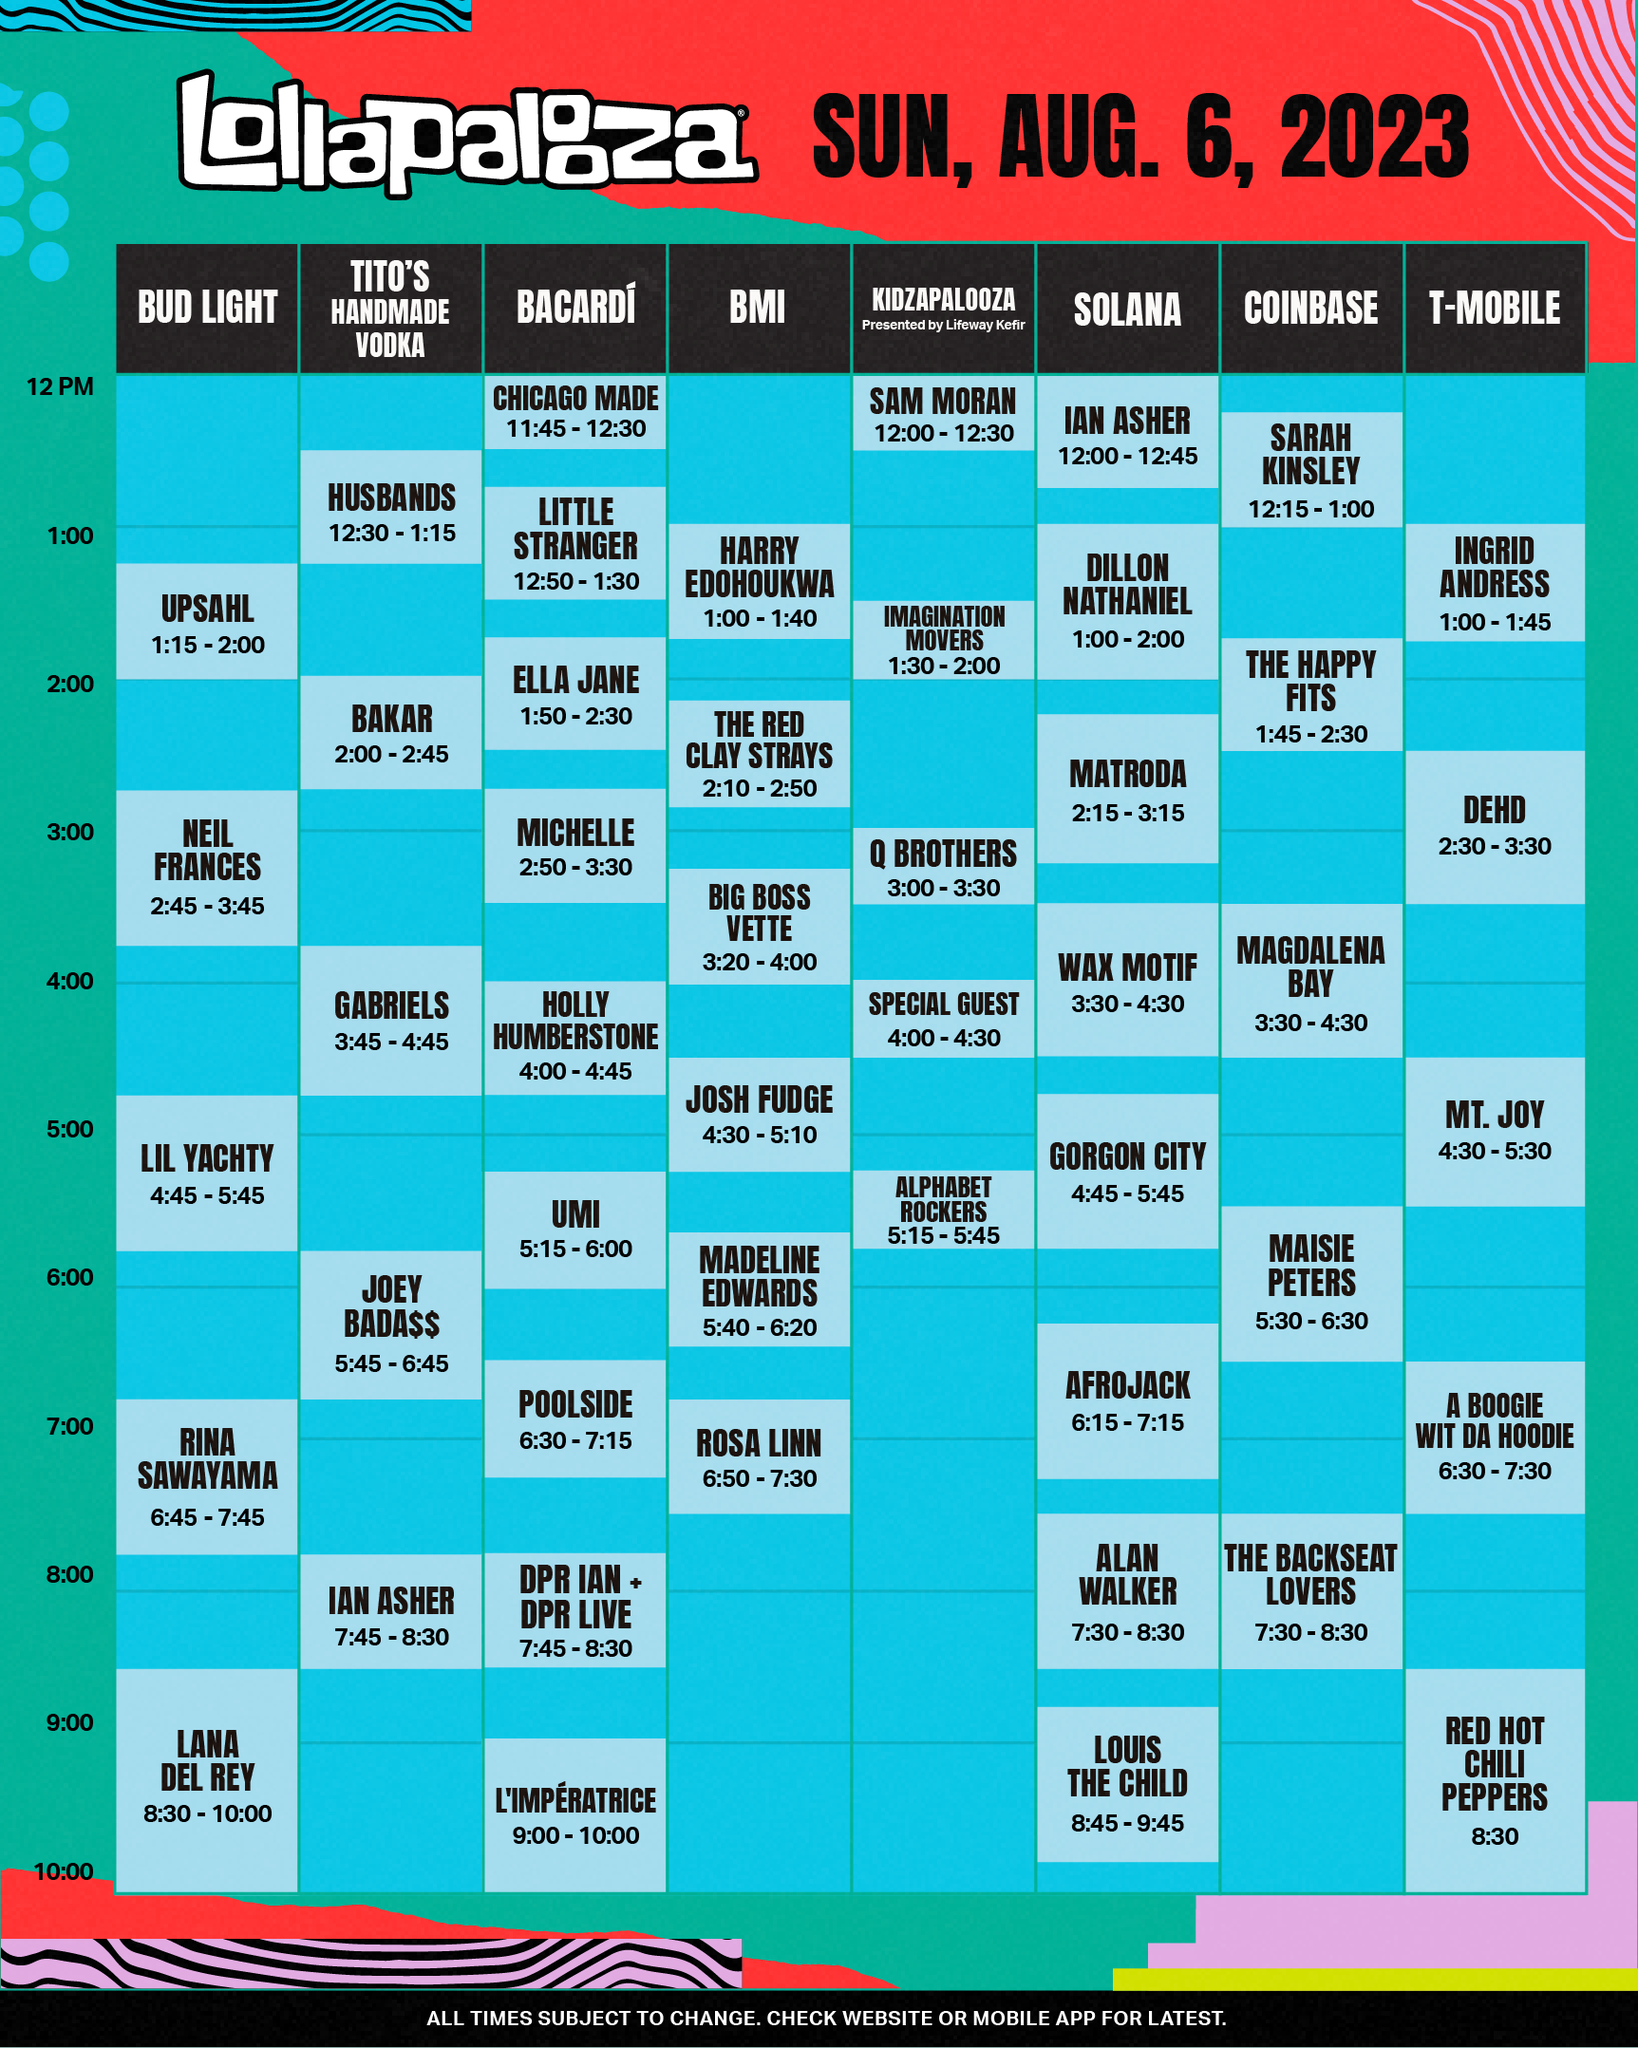 2023 Lollapalooza Schedule Announced! 4